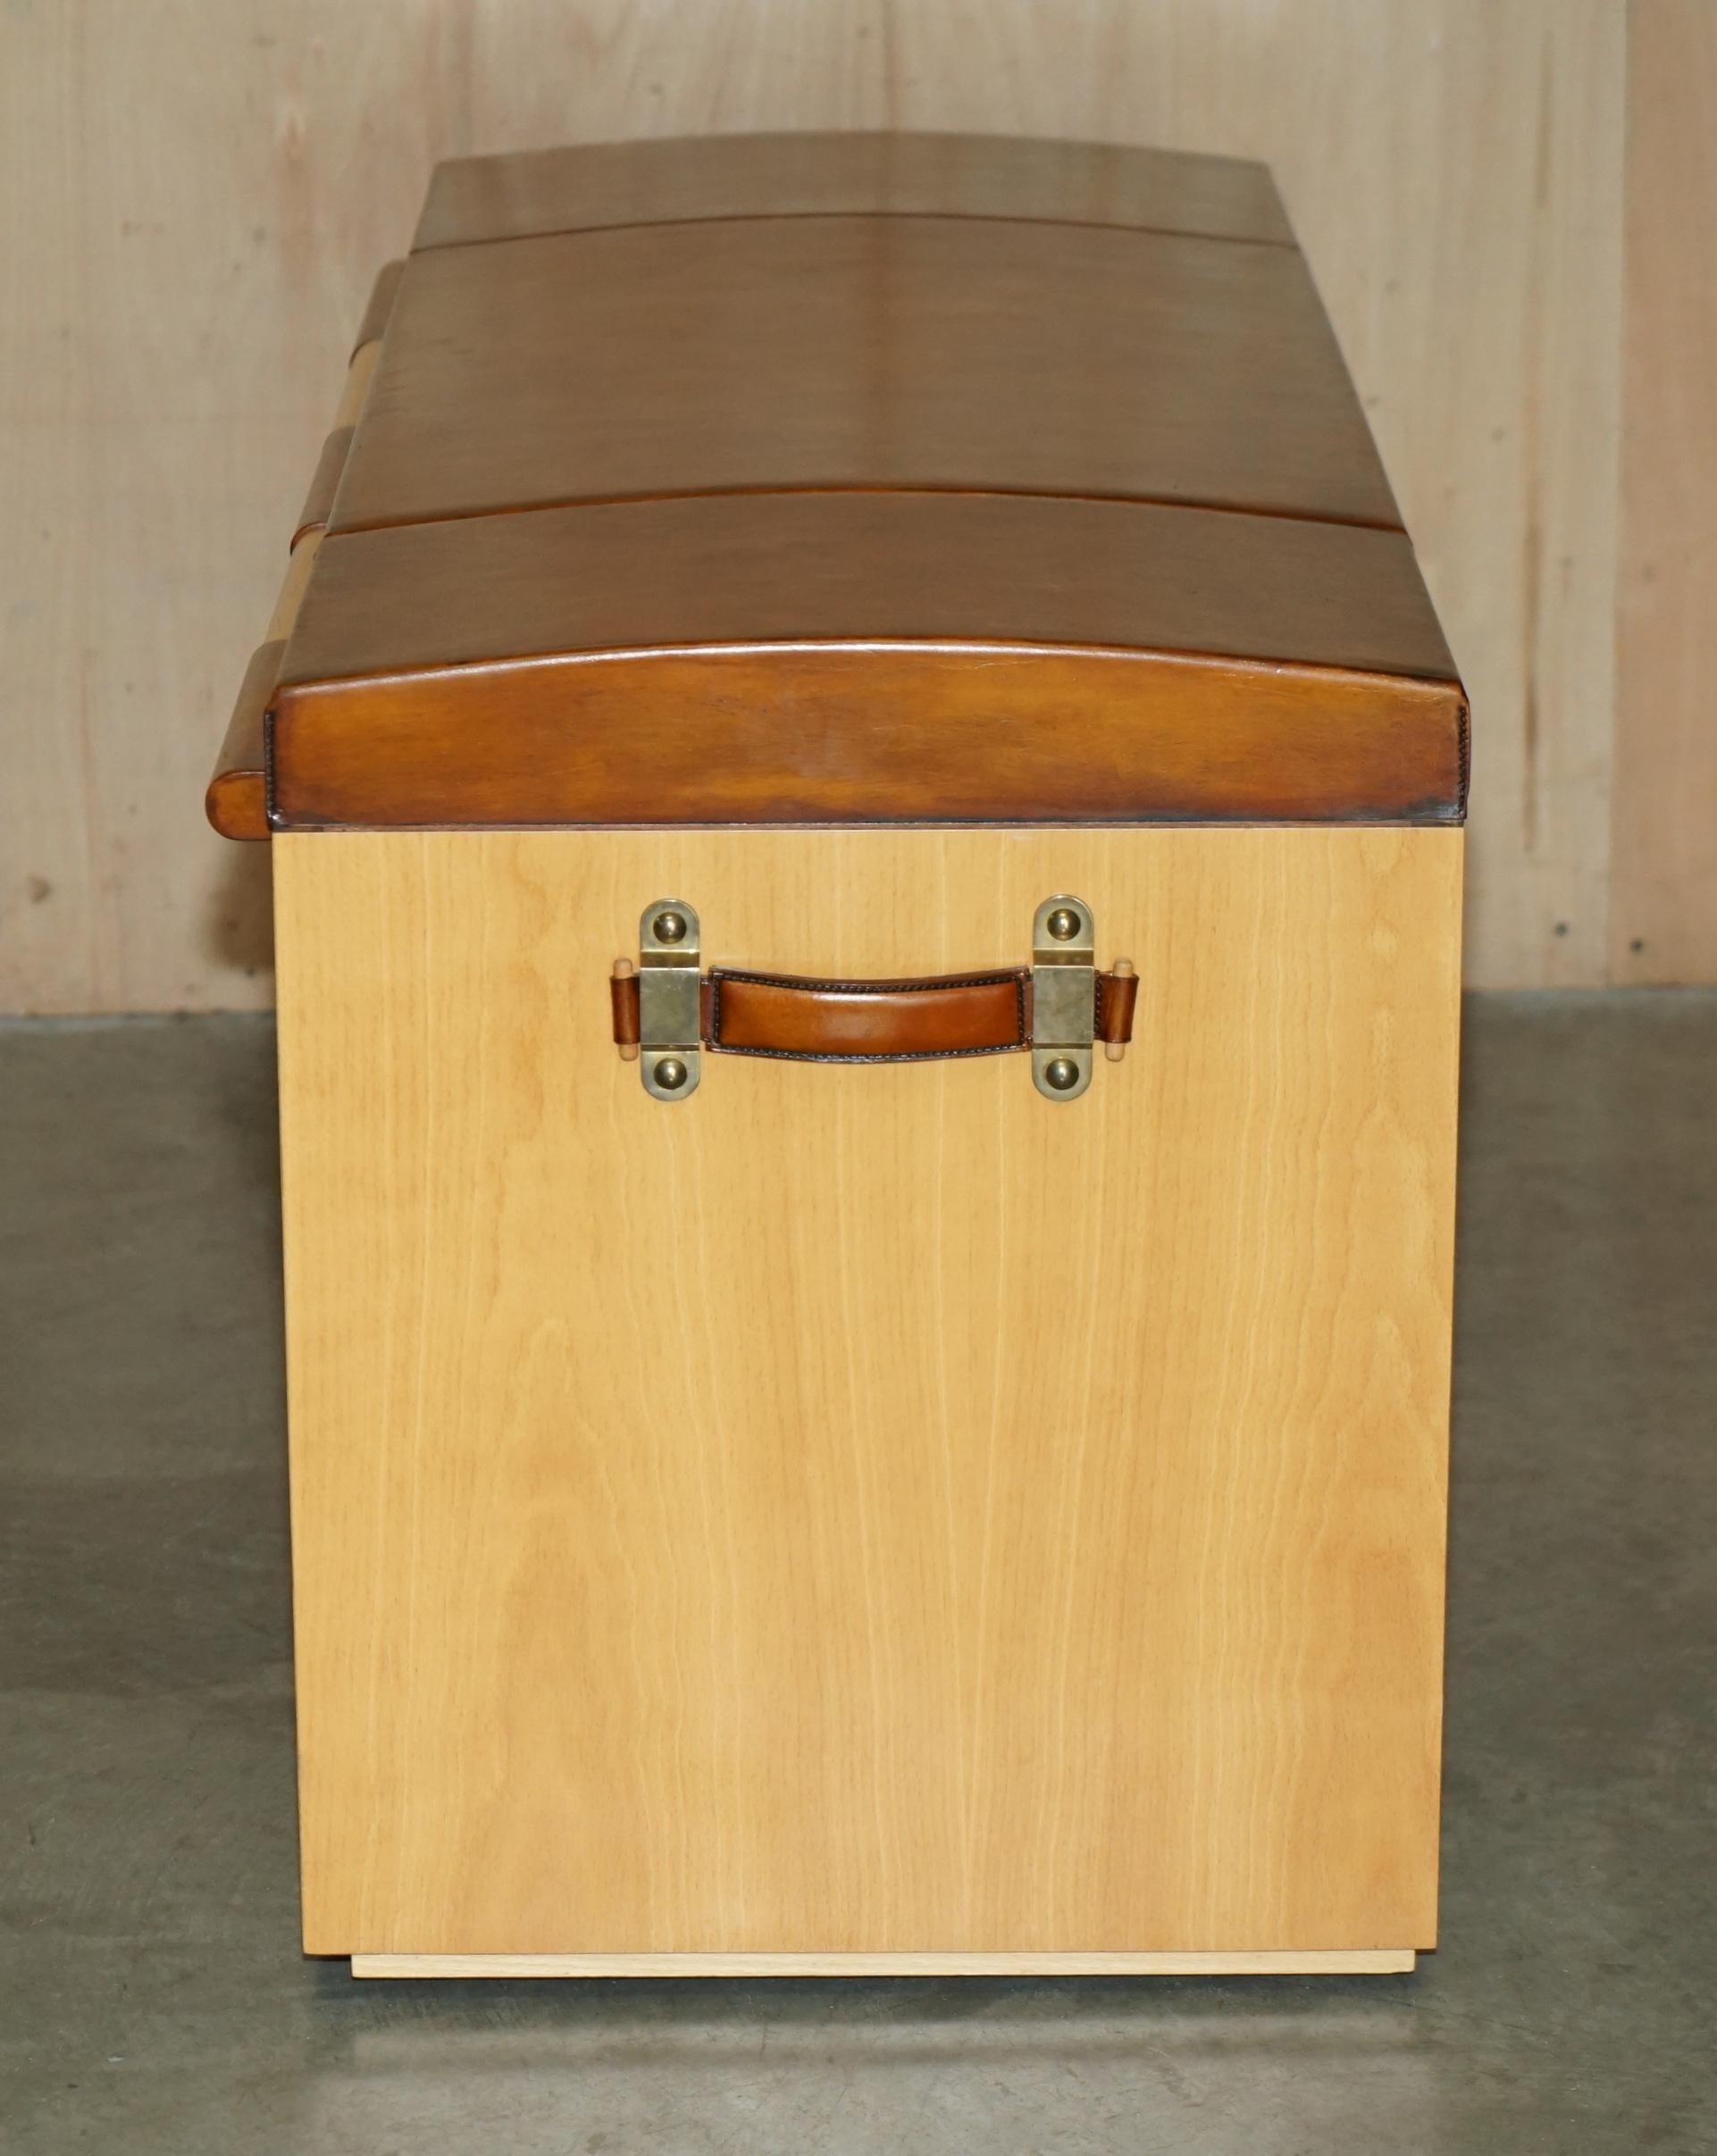 Leather 1 OF 1 HERMES PARIS JOHN LOBB EXTRA LARGE SHOE TRUNK HAND DYED LEATHER PANELs For Sale